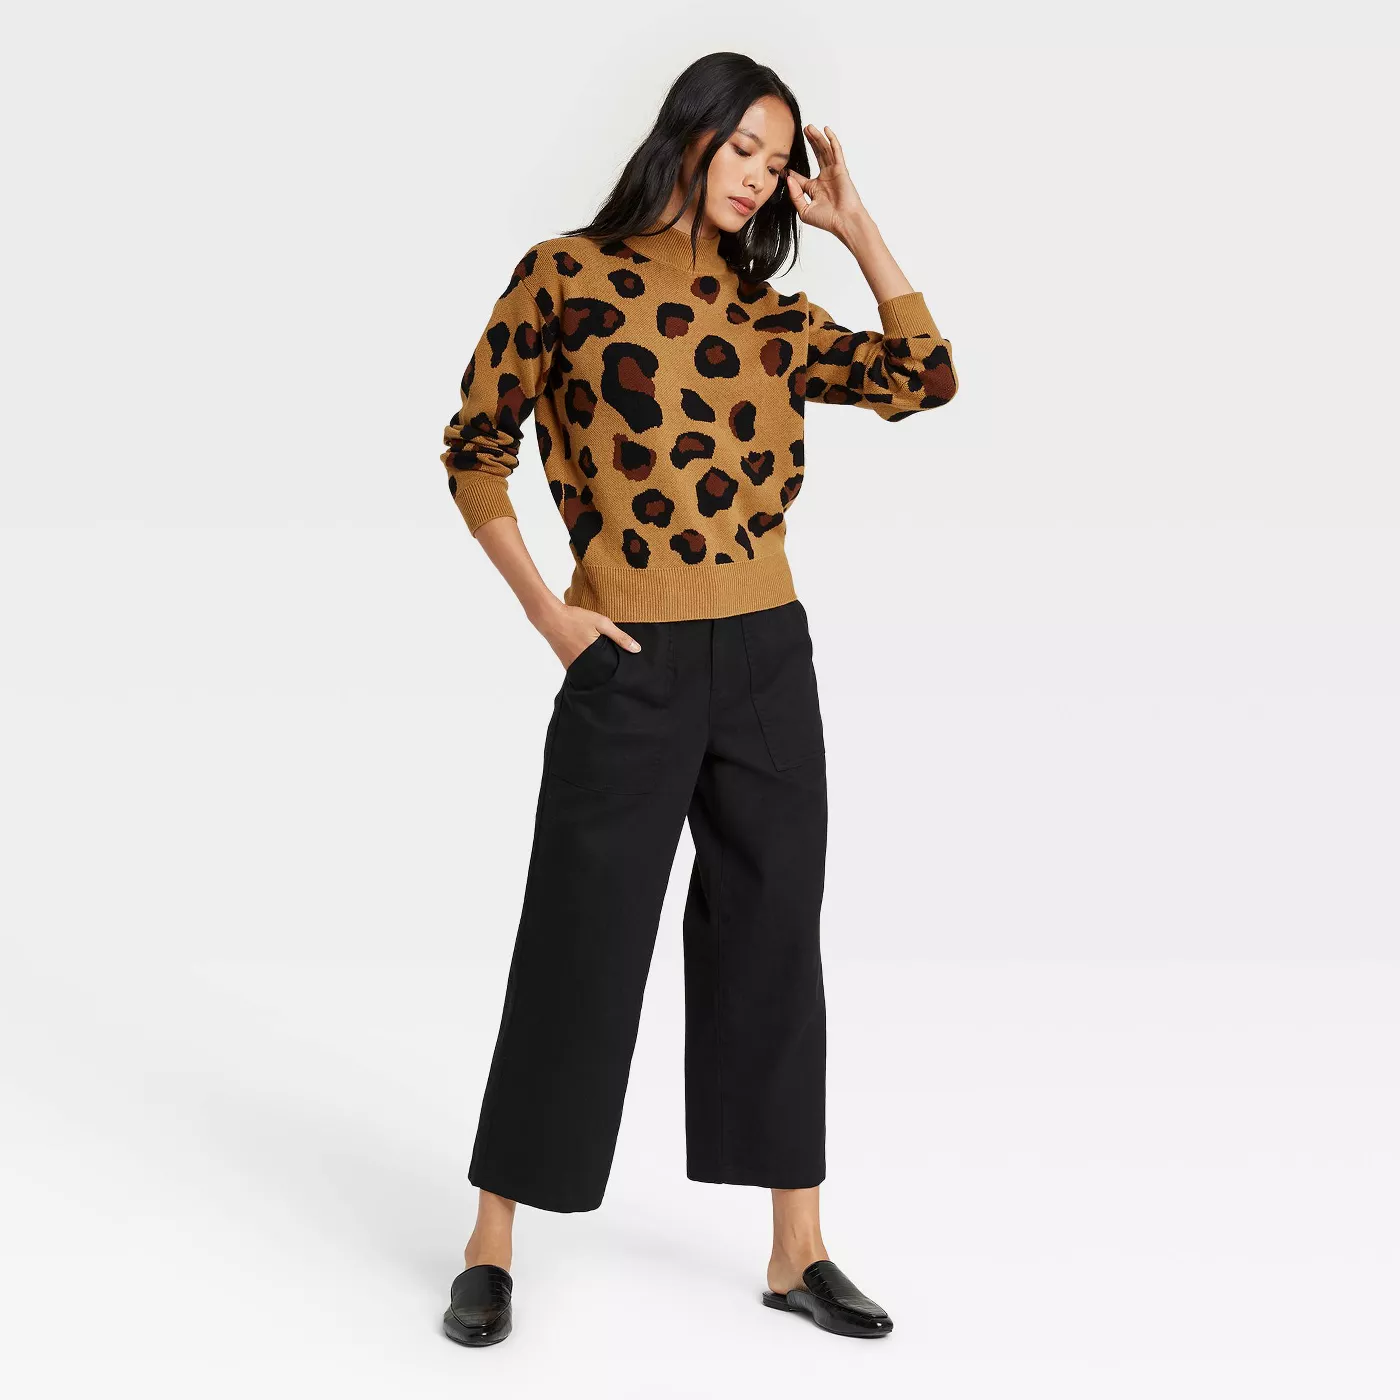 Women's Leopard Print Turtleneck Pullover Sweater - Who What Wear™ Brown - image 3 of 4